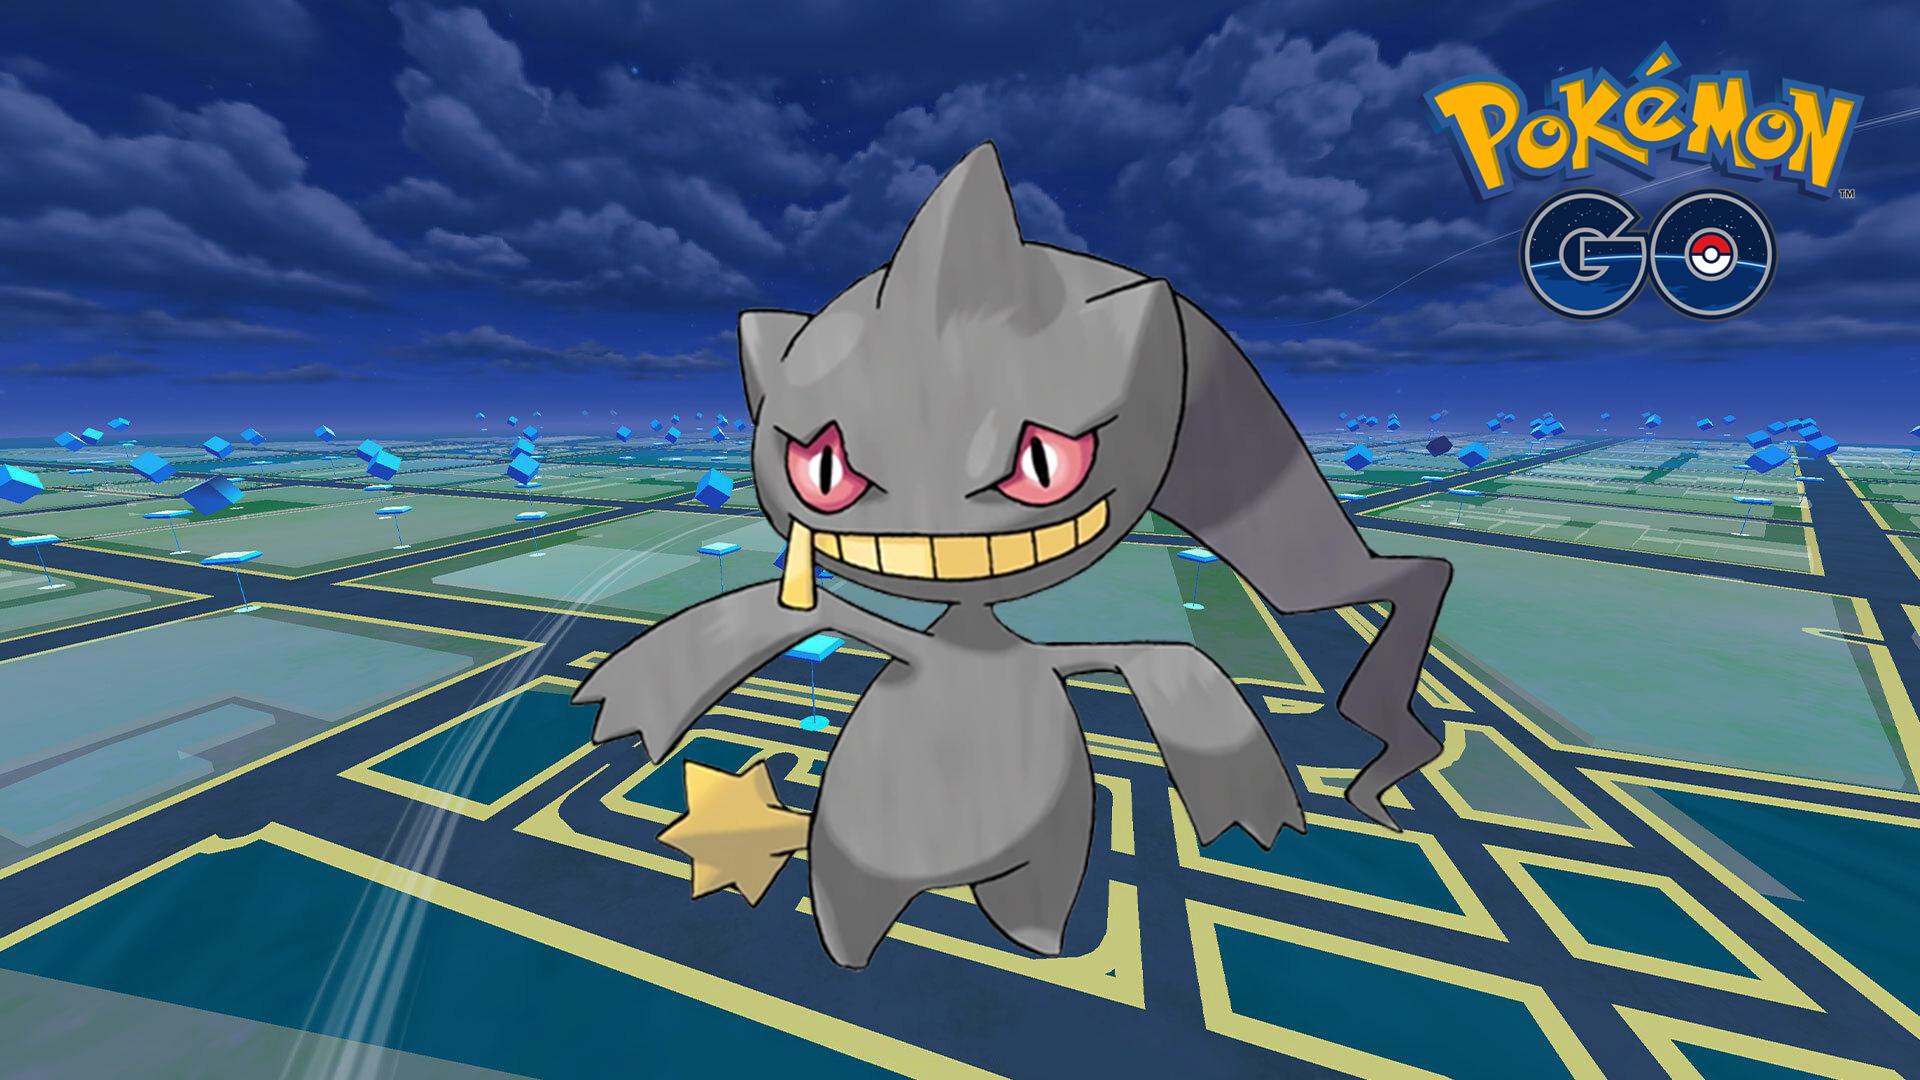 Banette (Pokémon GO) - Best Movesets, Counters, Evolutions and CP